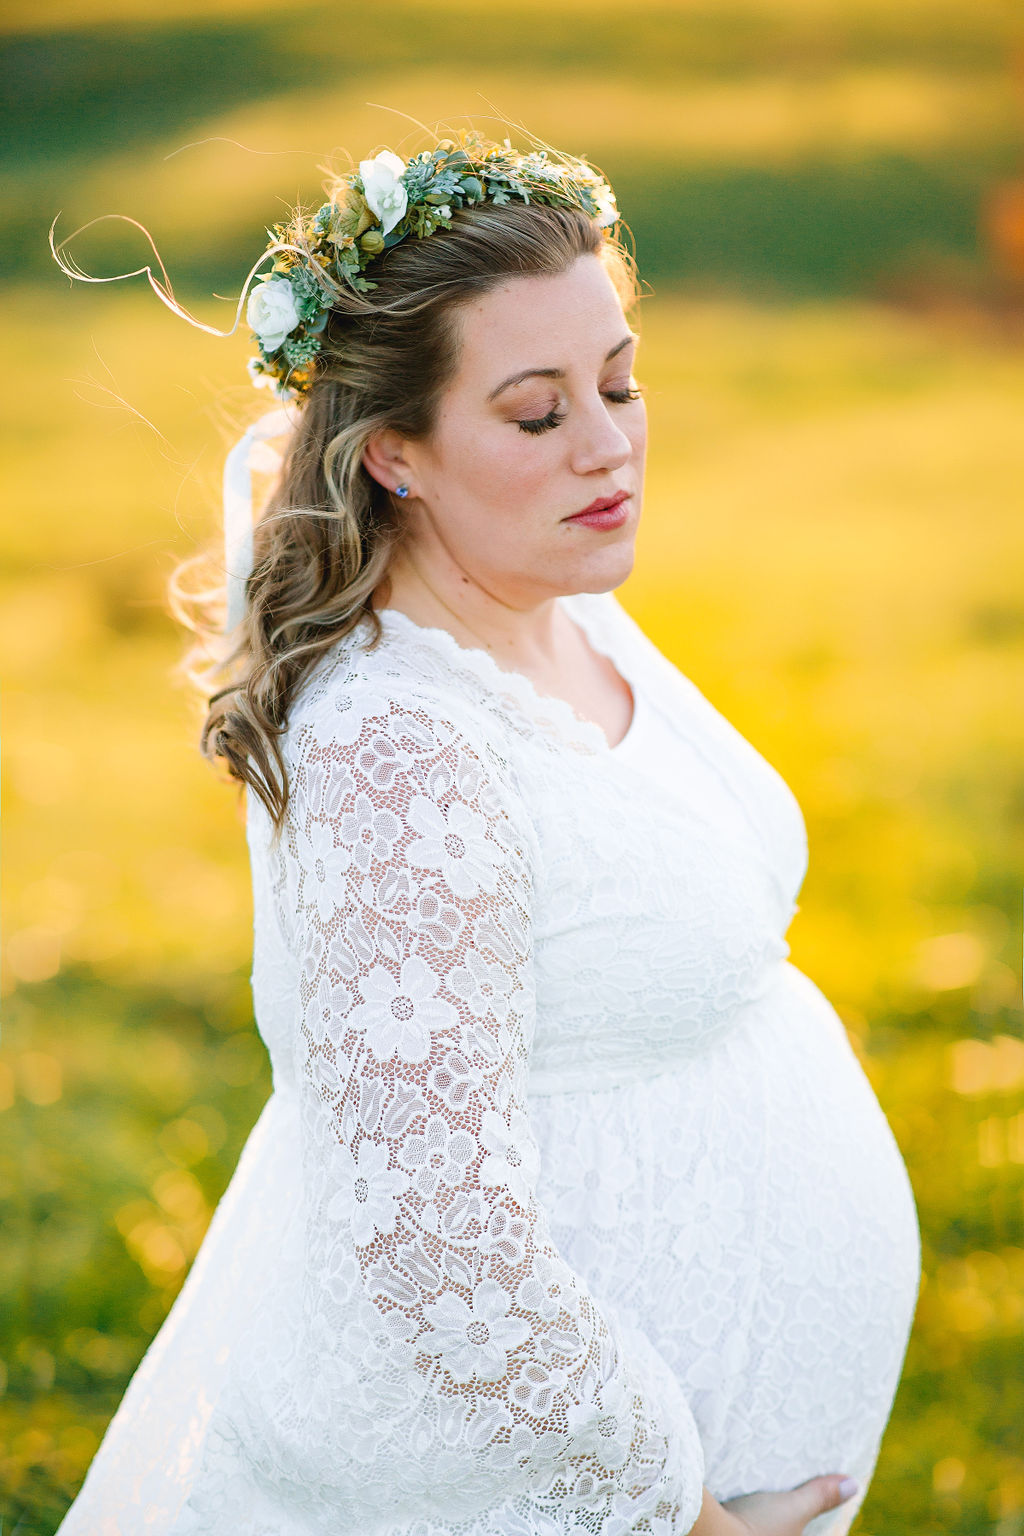 A mother to be stands in a grassy field in a white lace dress and floral headpiece kline chiropractic